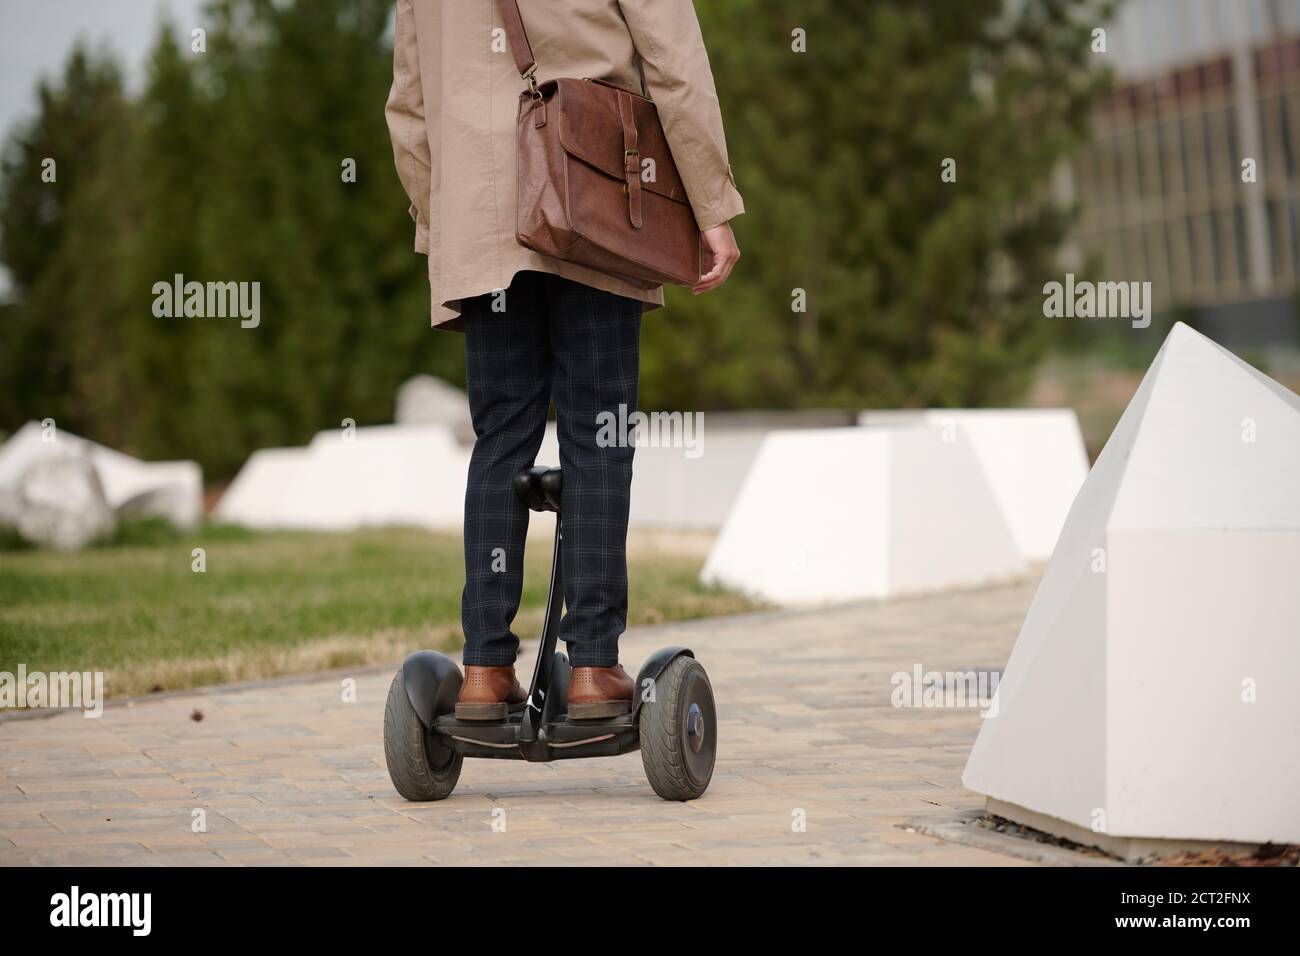 Rear view of contemporary businessman in smart casualwear riding gyroscope Stock Photo